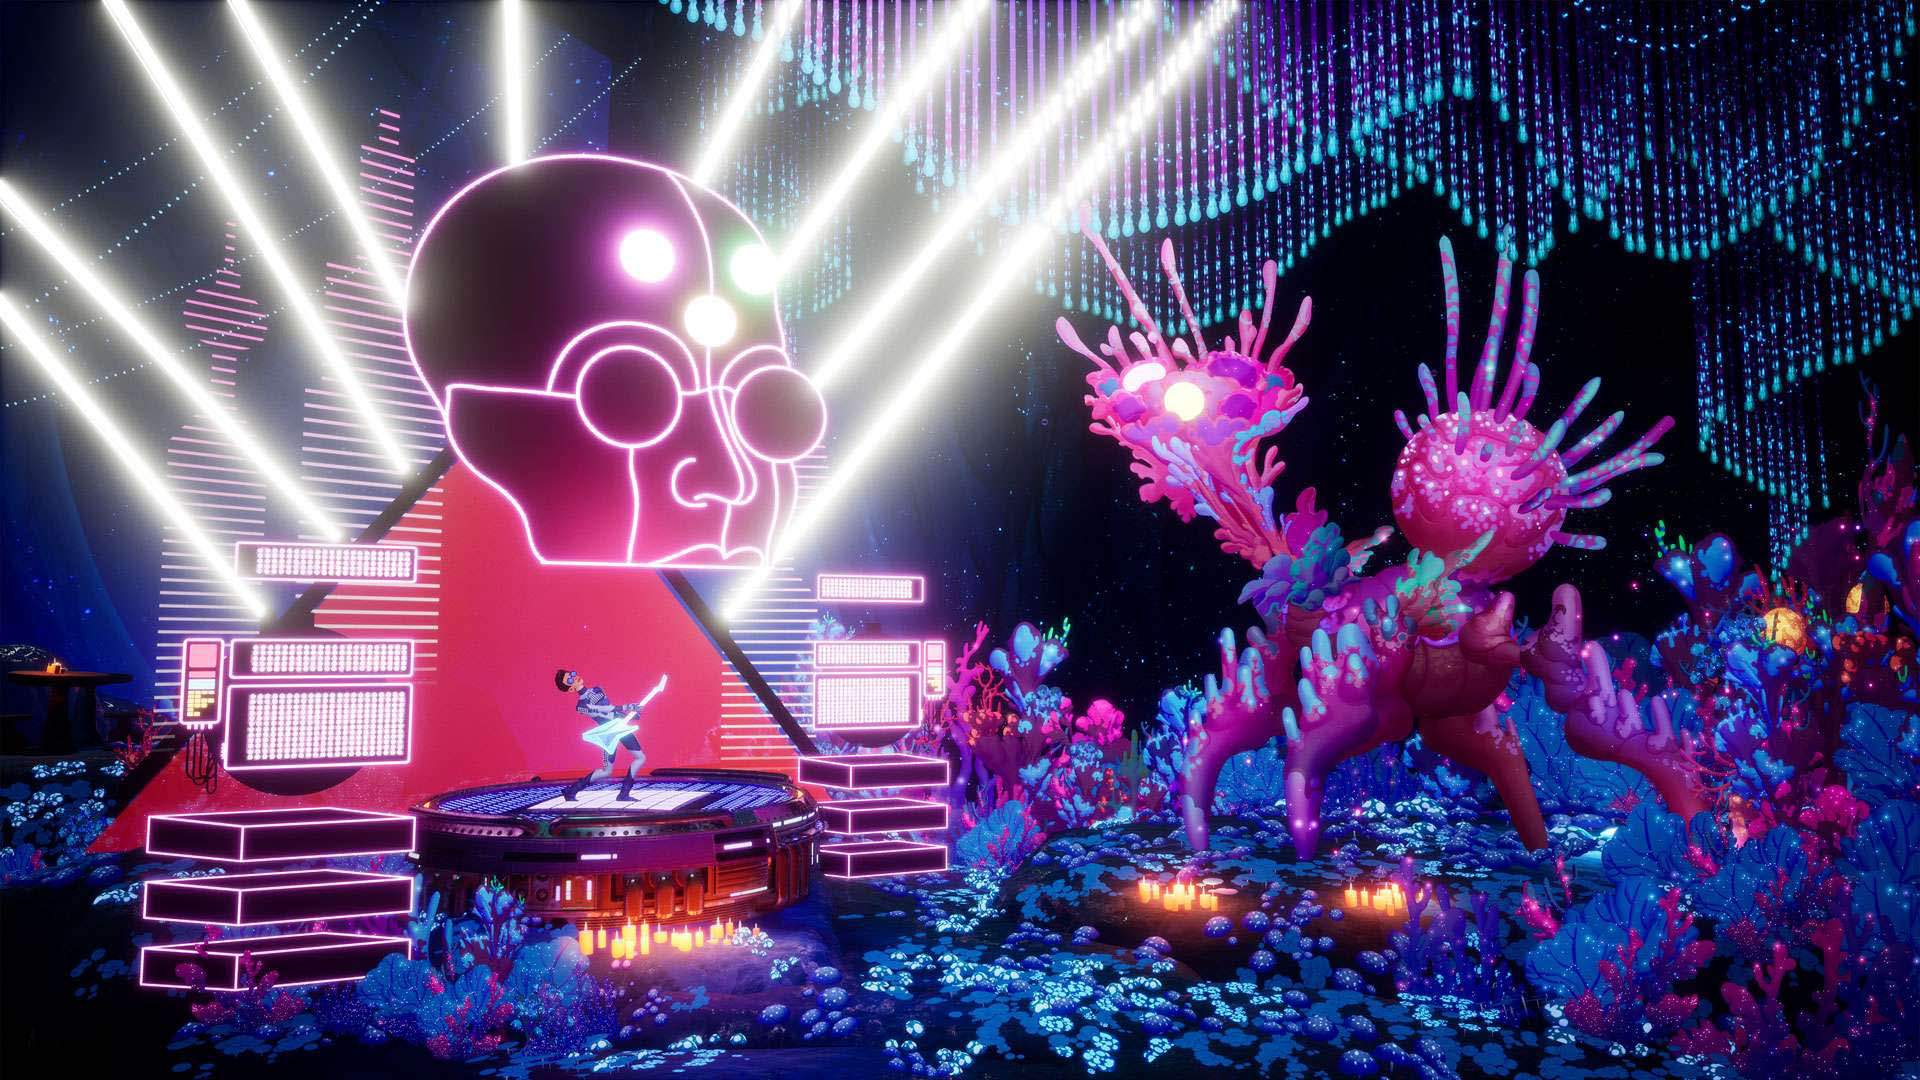 A screenshot from The Artful Escape, one of the best Australian games, showing the main character Francis Vendetti playing a spectacular concert to an alien creature